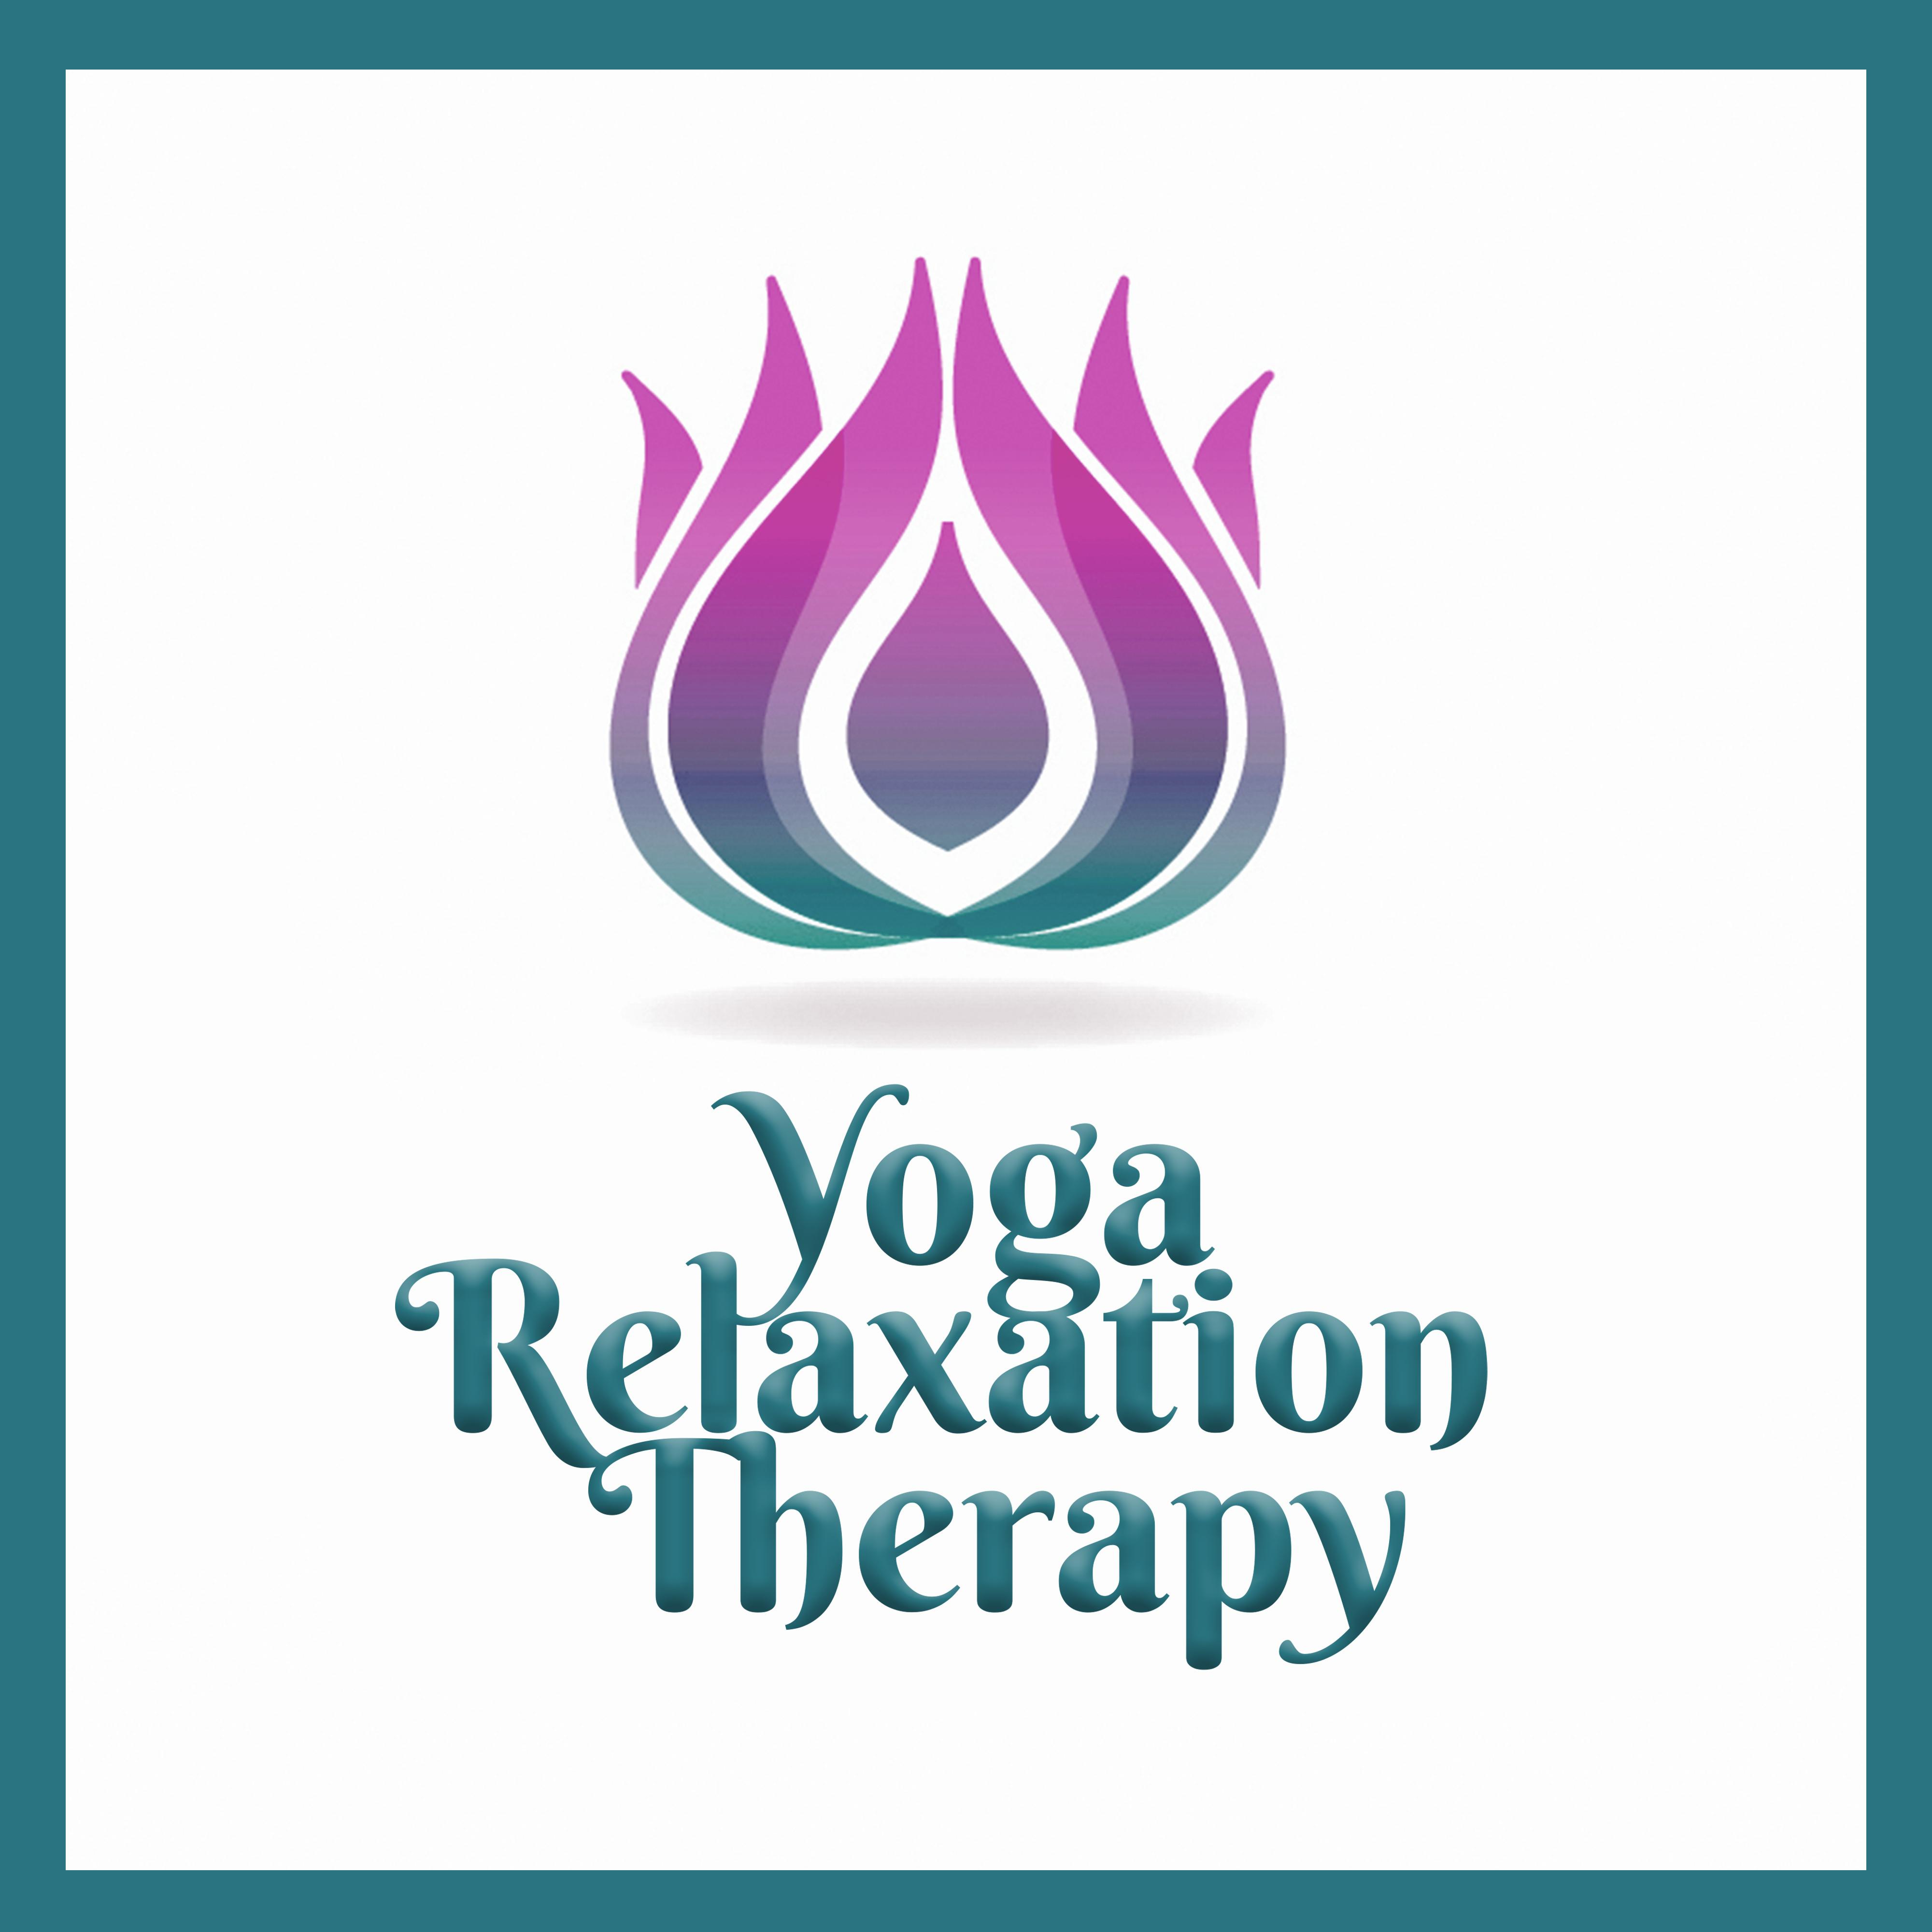 Yoga Relaxation Therapy